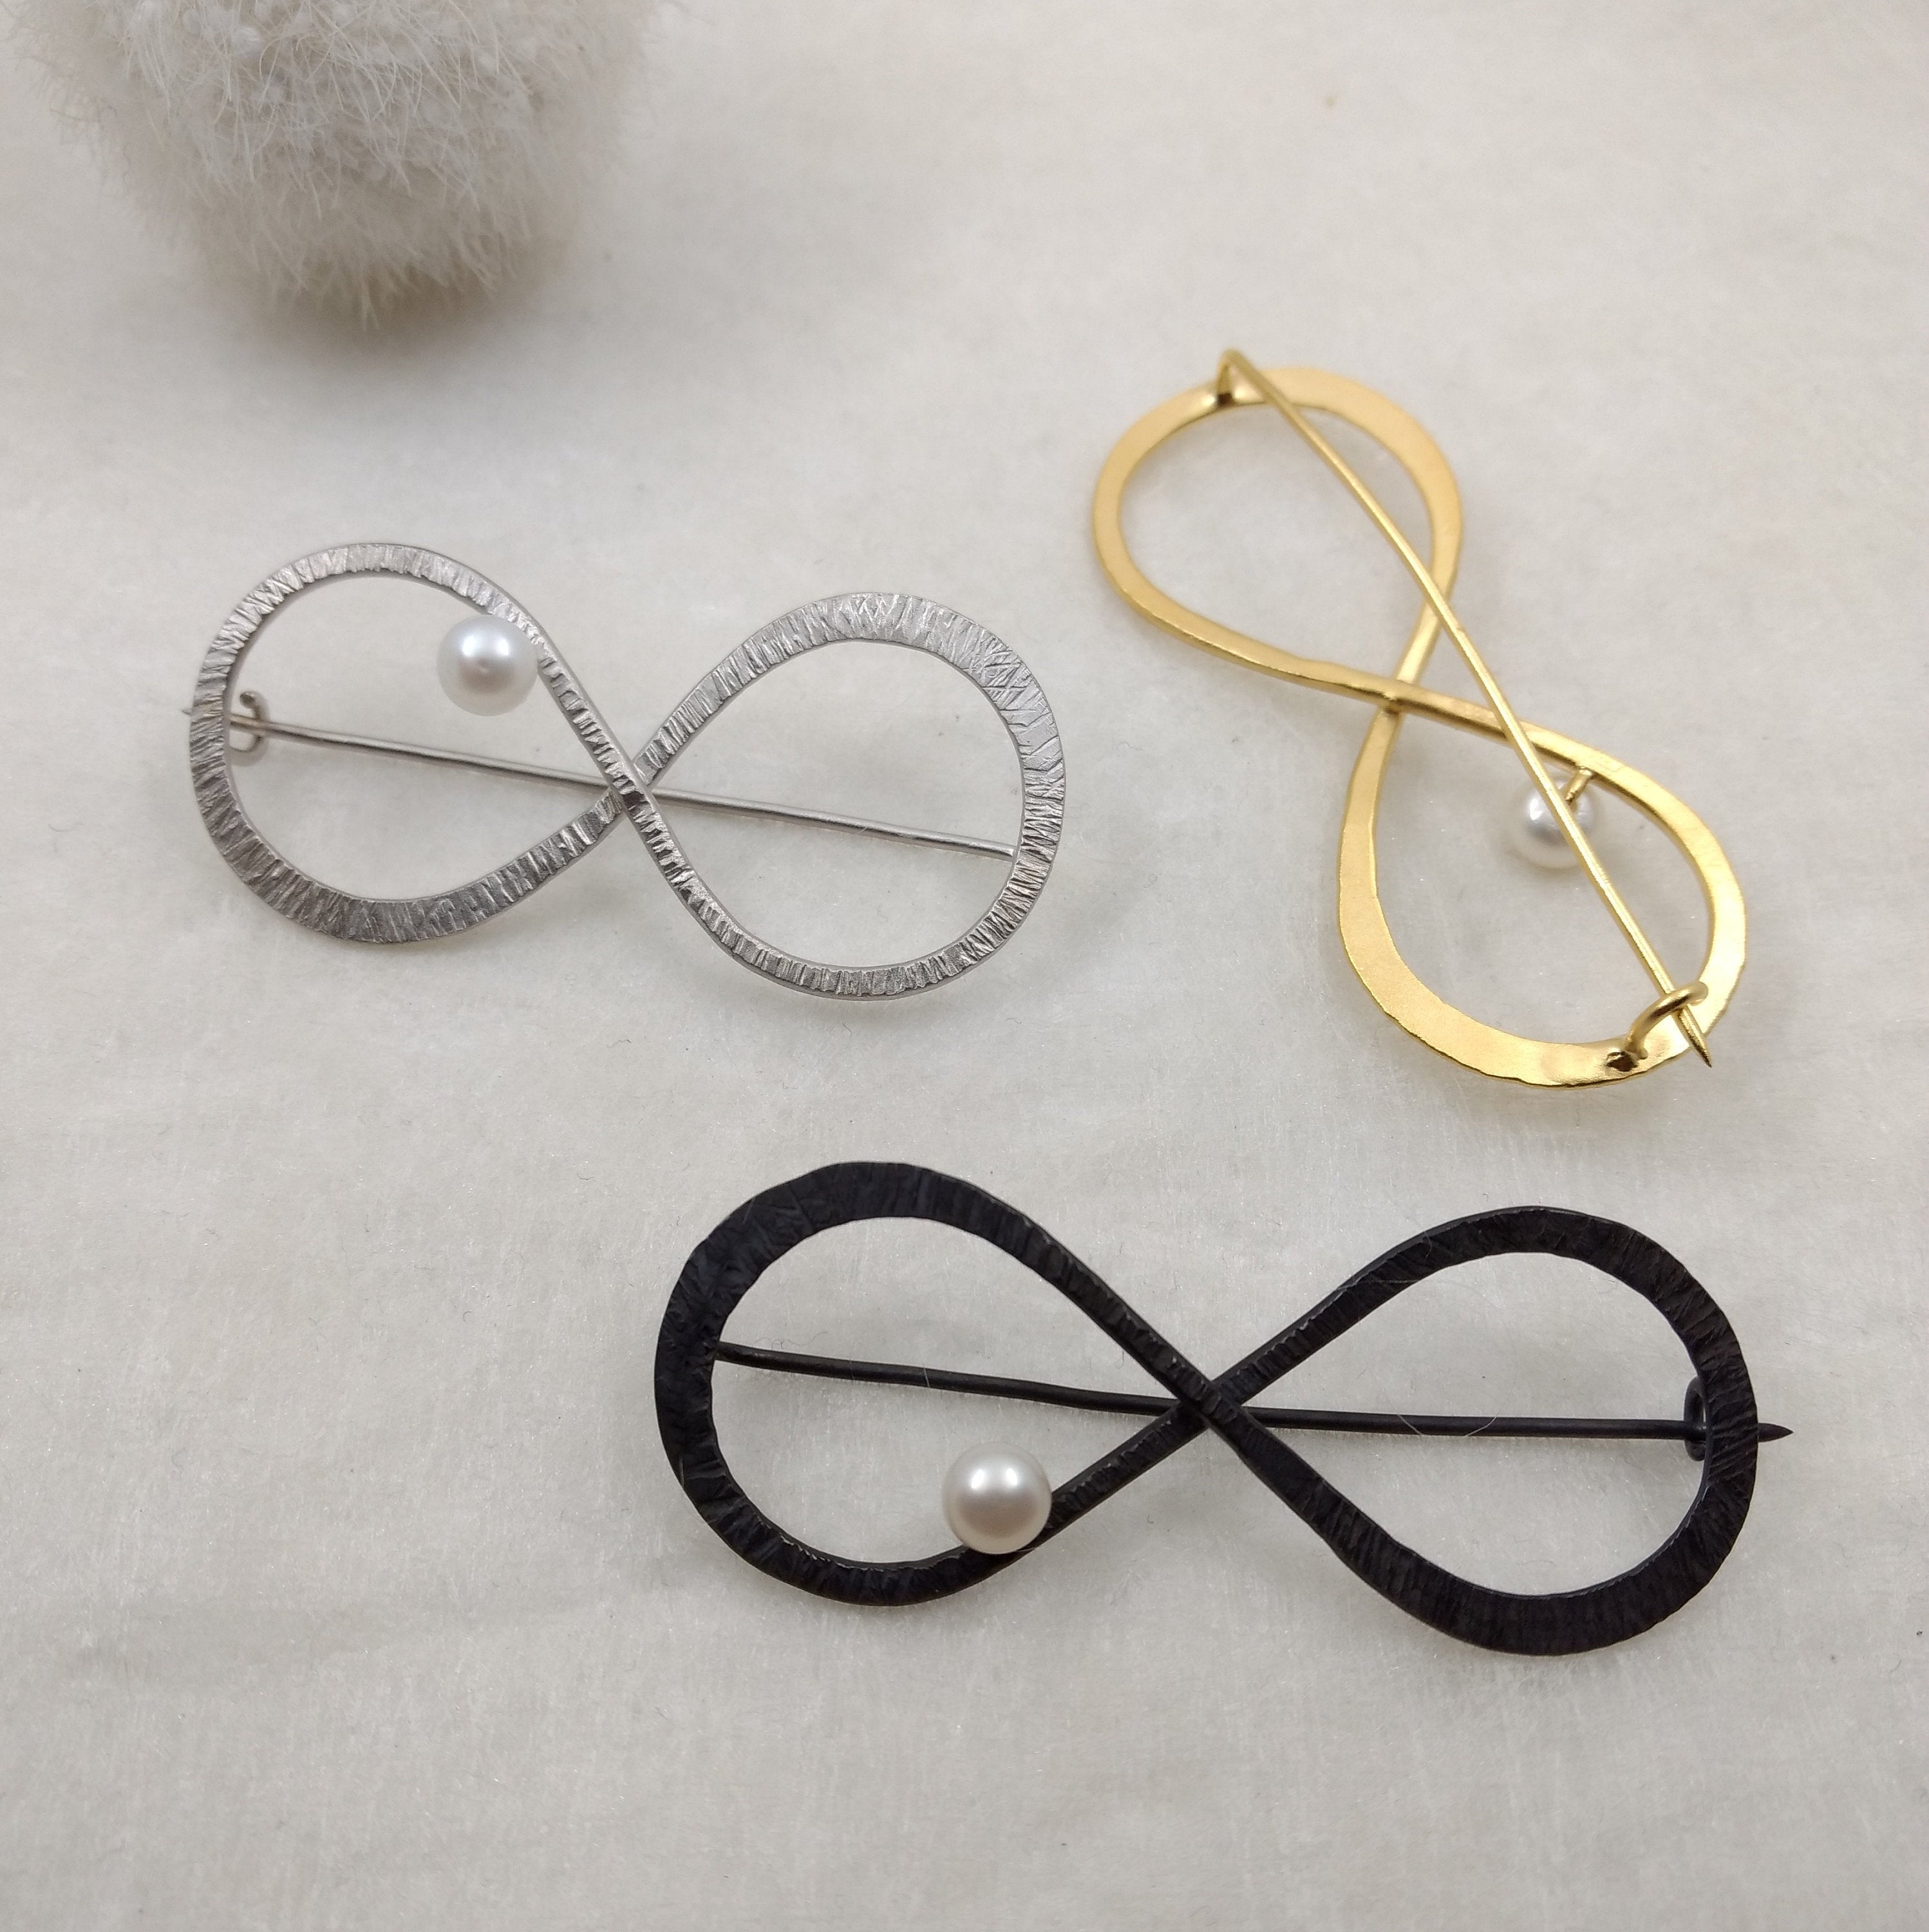 LaLune - Infinity Silver brooch with pearl, available in 3 finishes